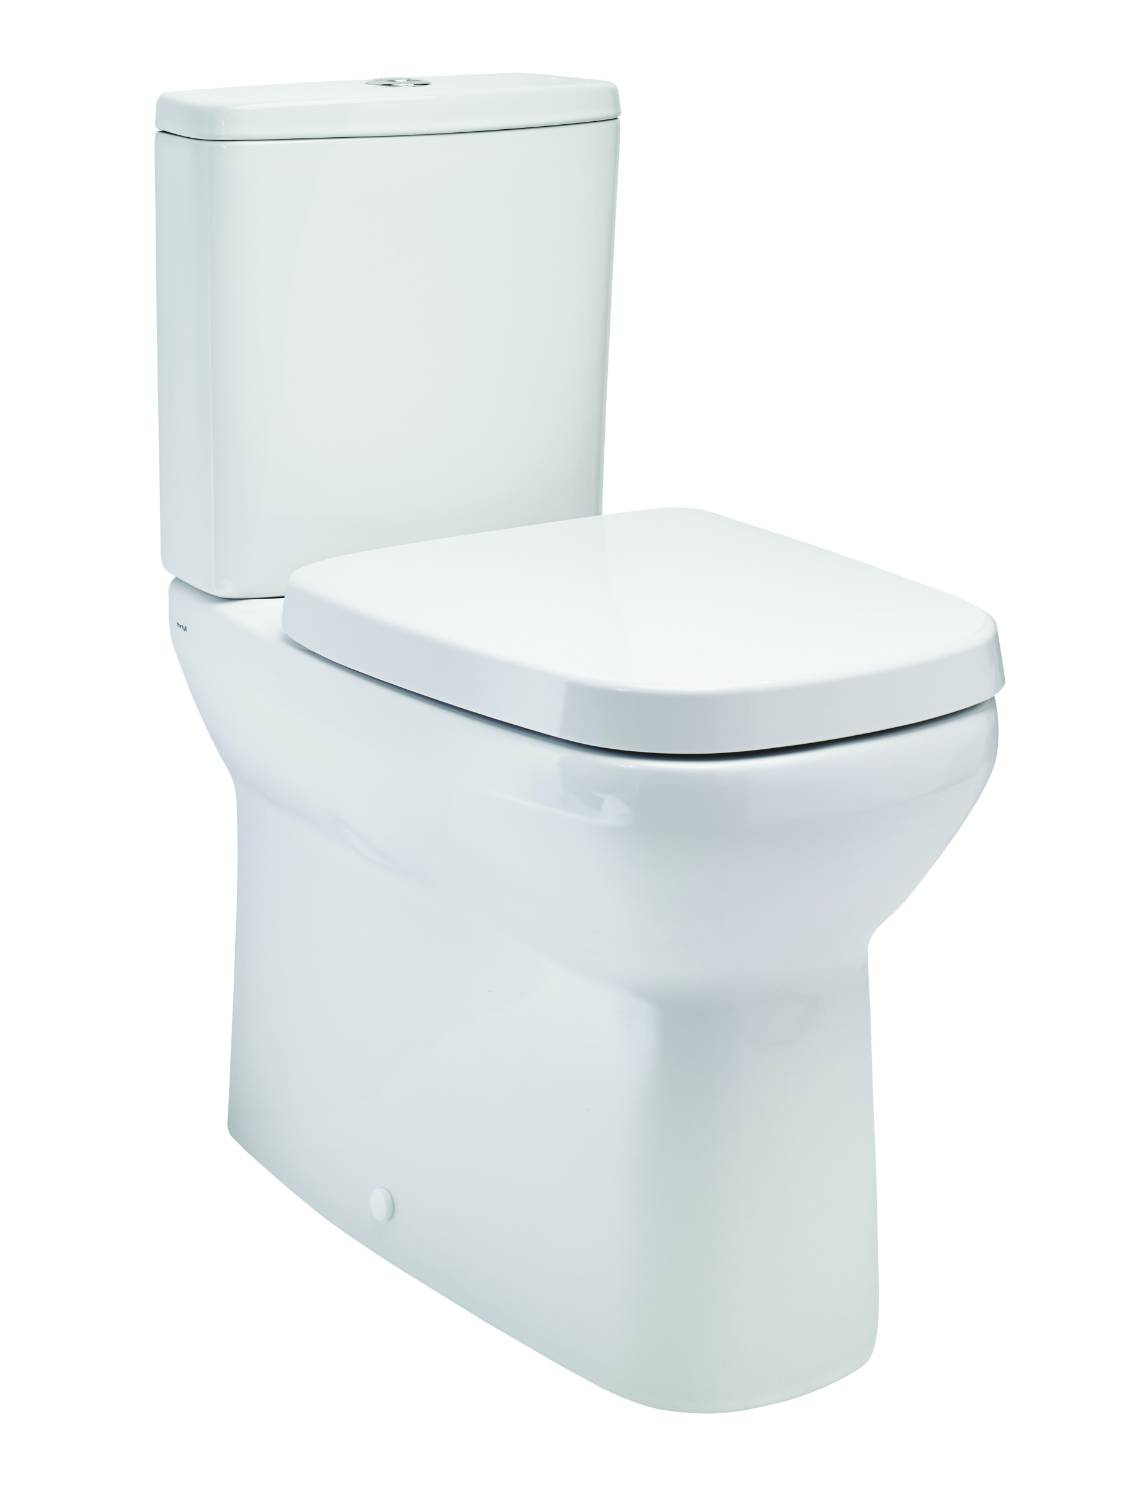 MyHome Close-Coupled Back-to-Wall Toilet